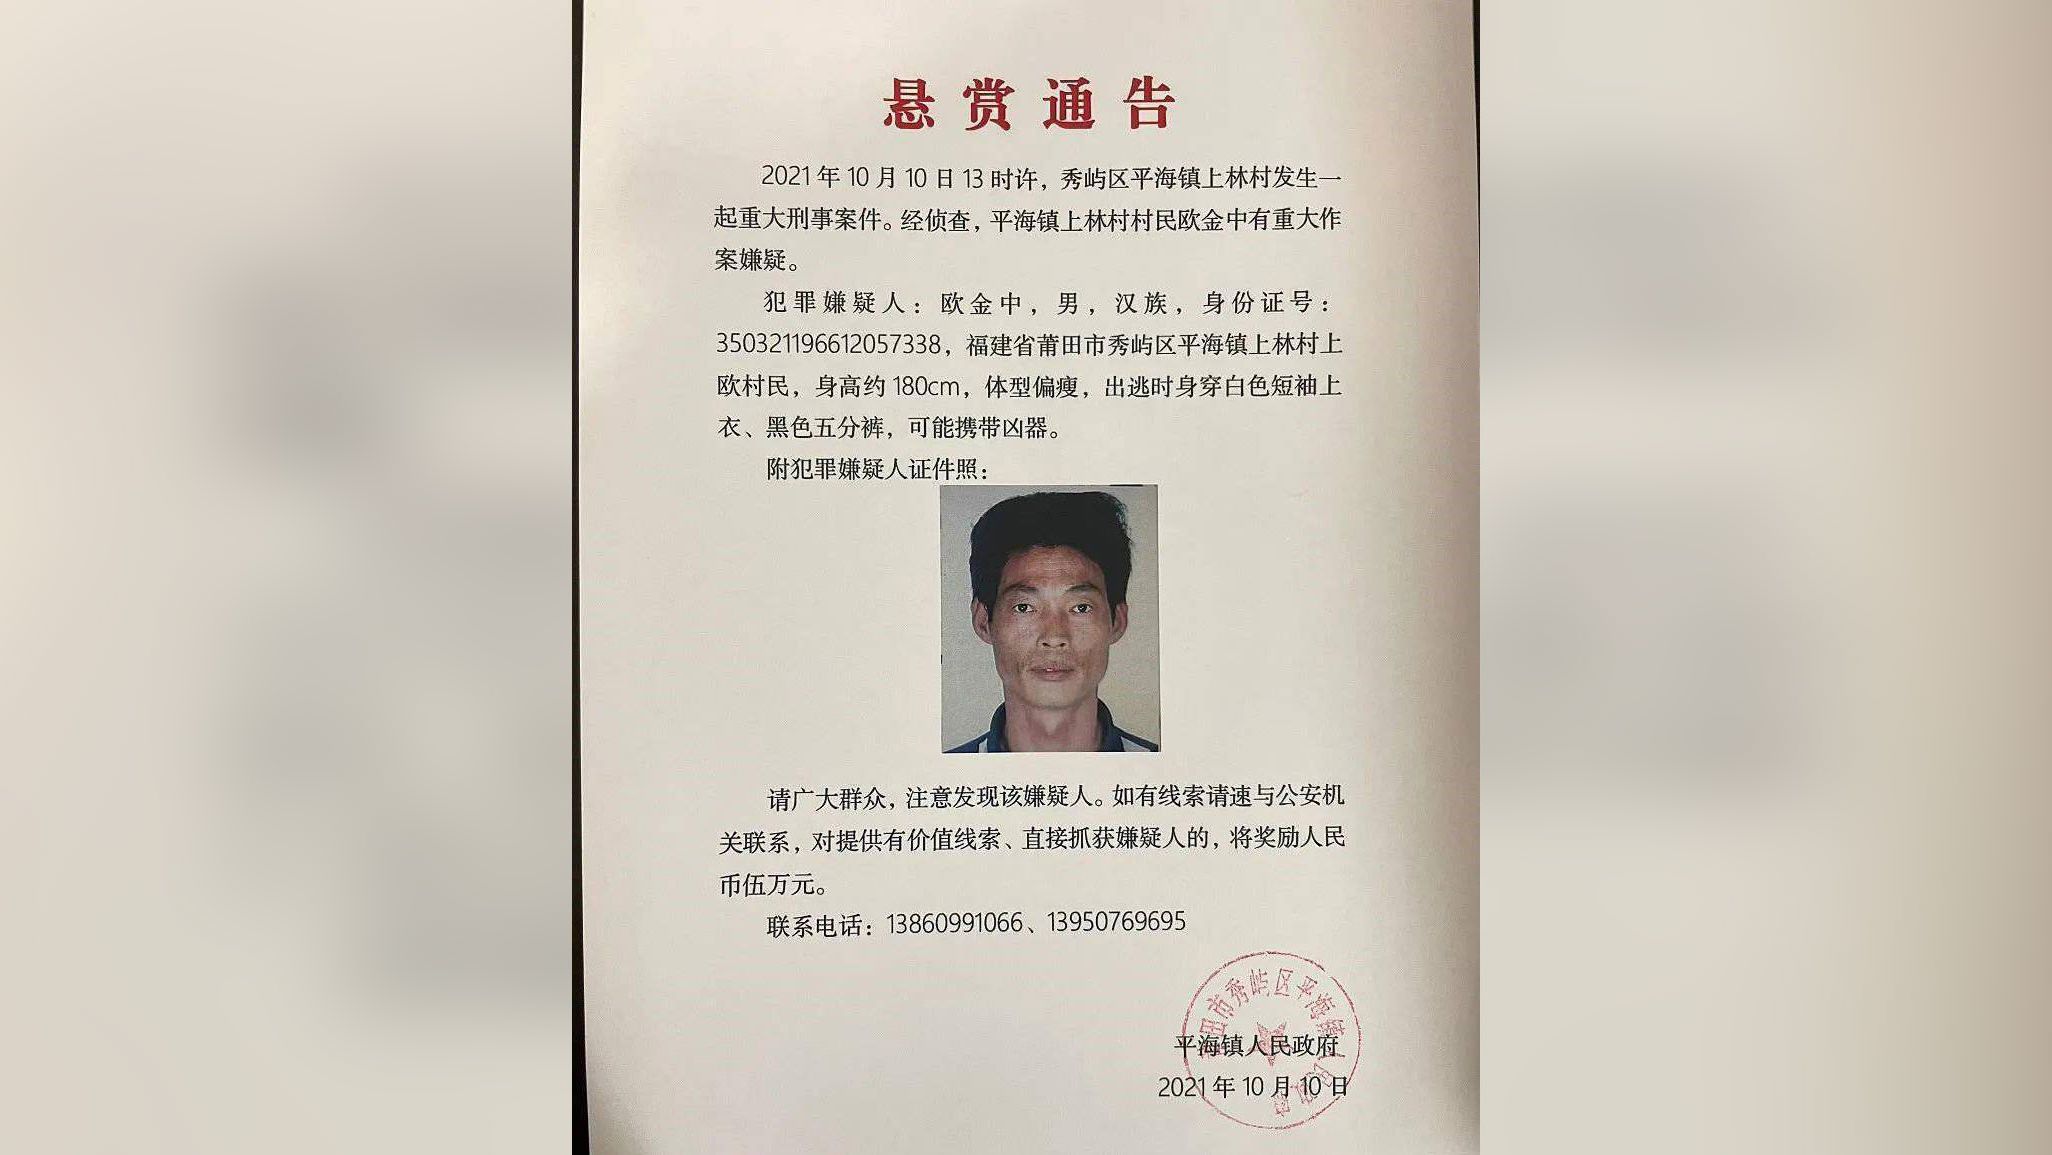 On October 10, Pinghai County People's Government issued a bounty for information leading to Ou's capture.